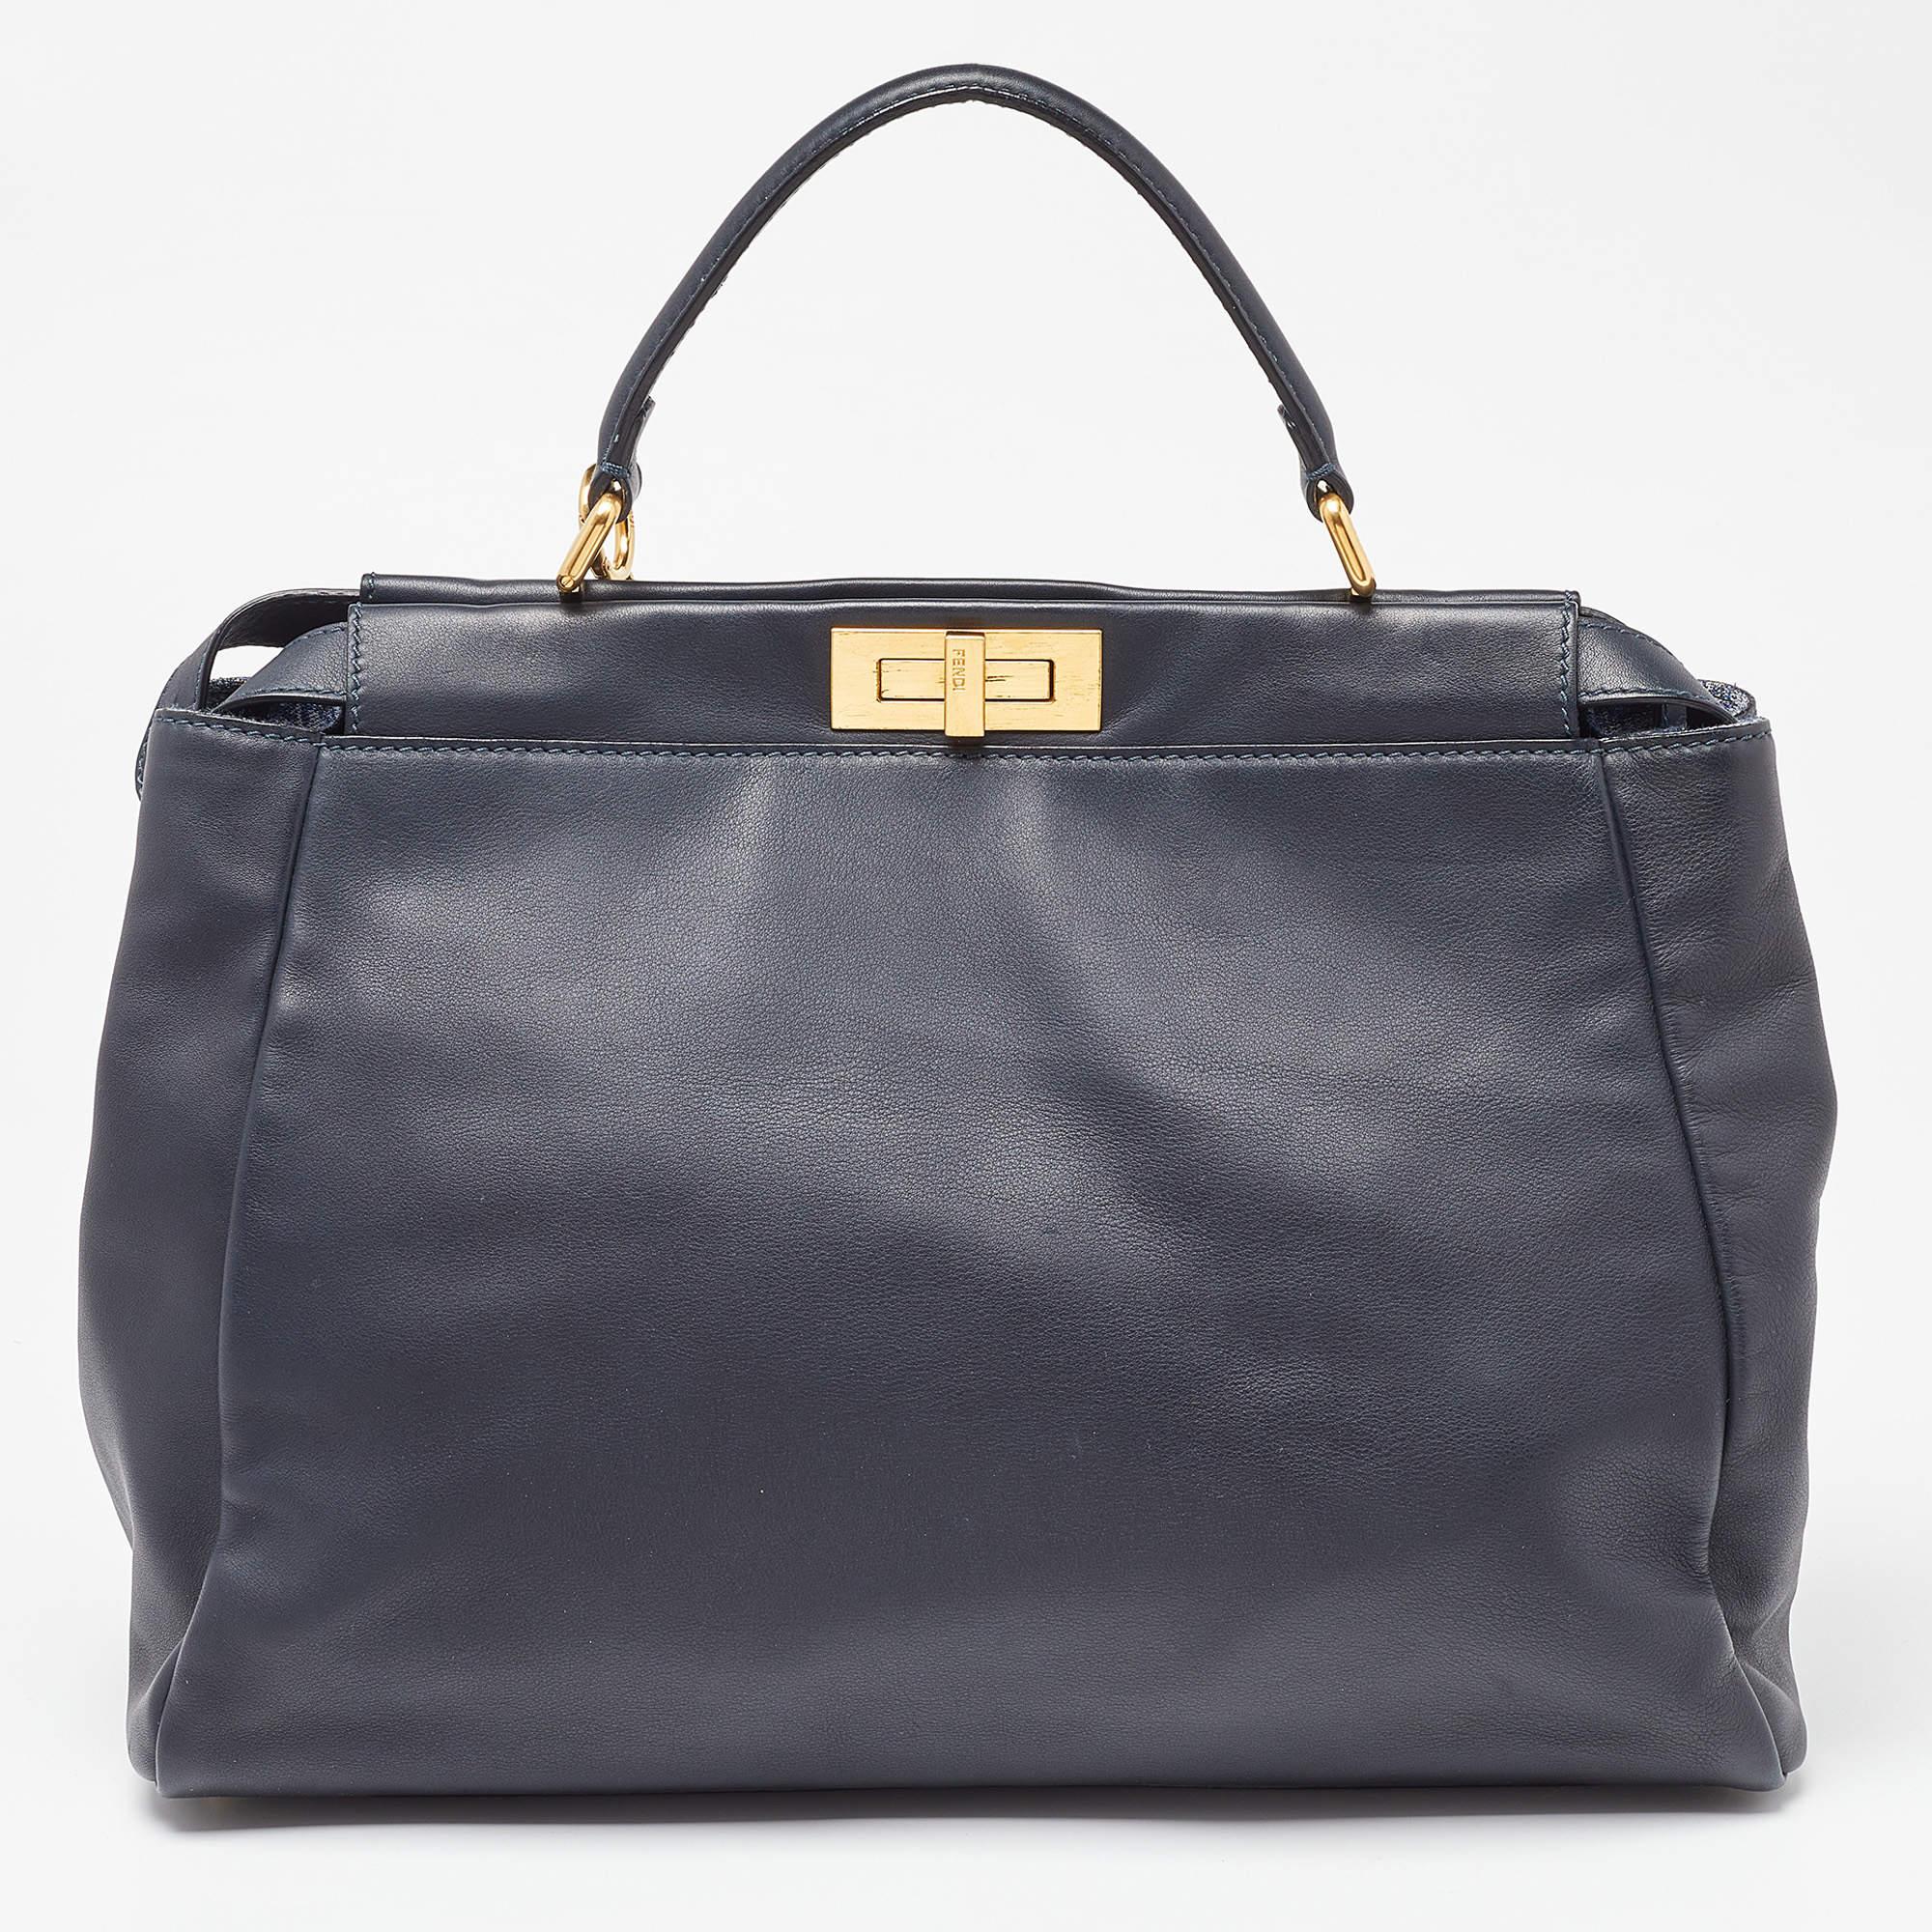 Exuding unparalleled elegance and sophistication, this bag is made from the finest material in a gorgeous hue. While the roomy interior offers ample space, the top handle allows you to carry it with much elegance.

Includes: Detachable Strap, Info